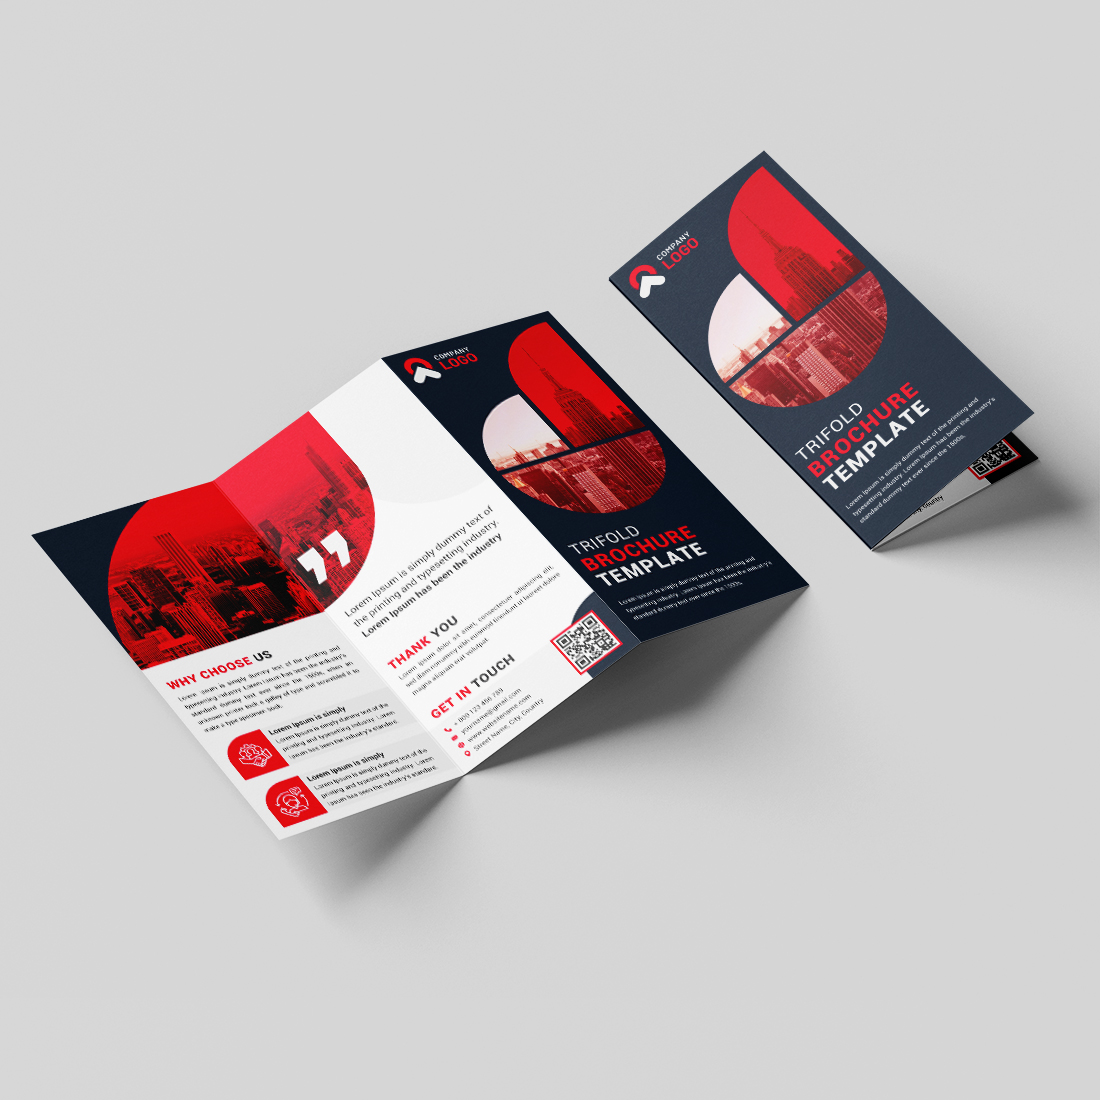 Minimal Trifold Brochure Template Design cover image.